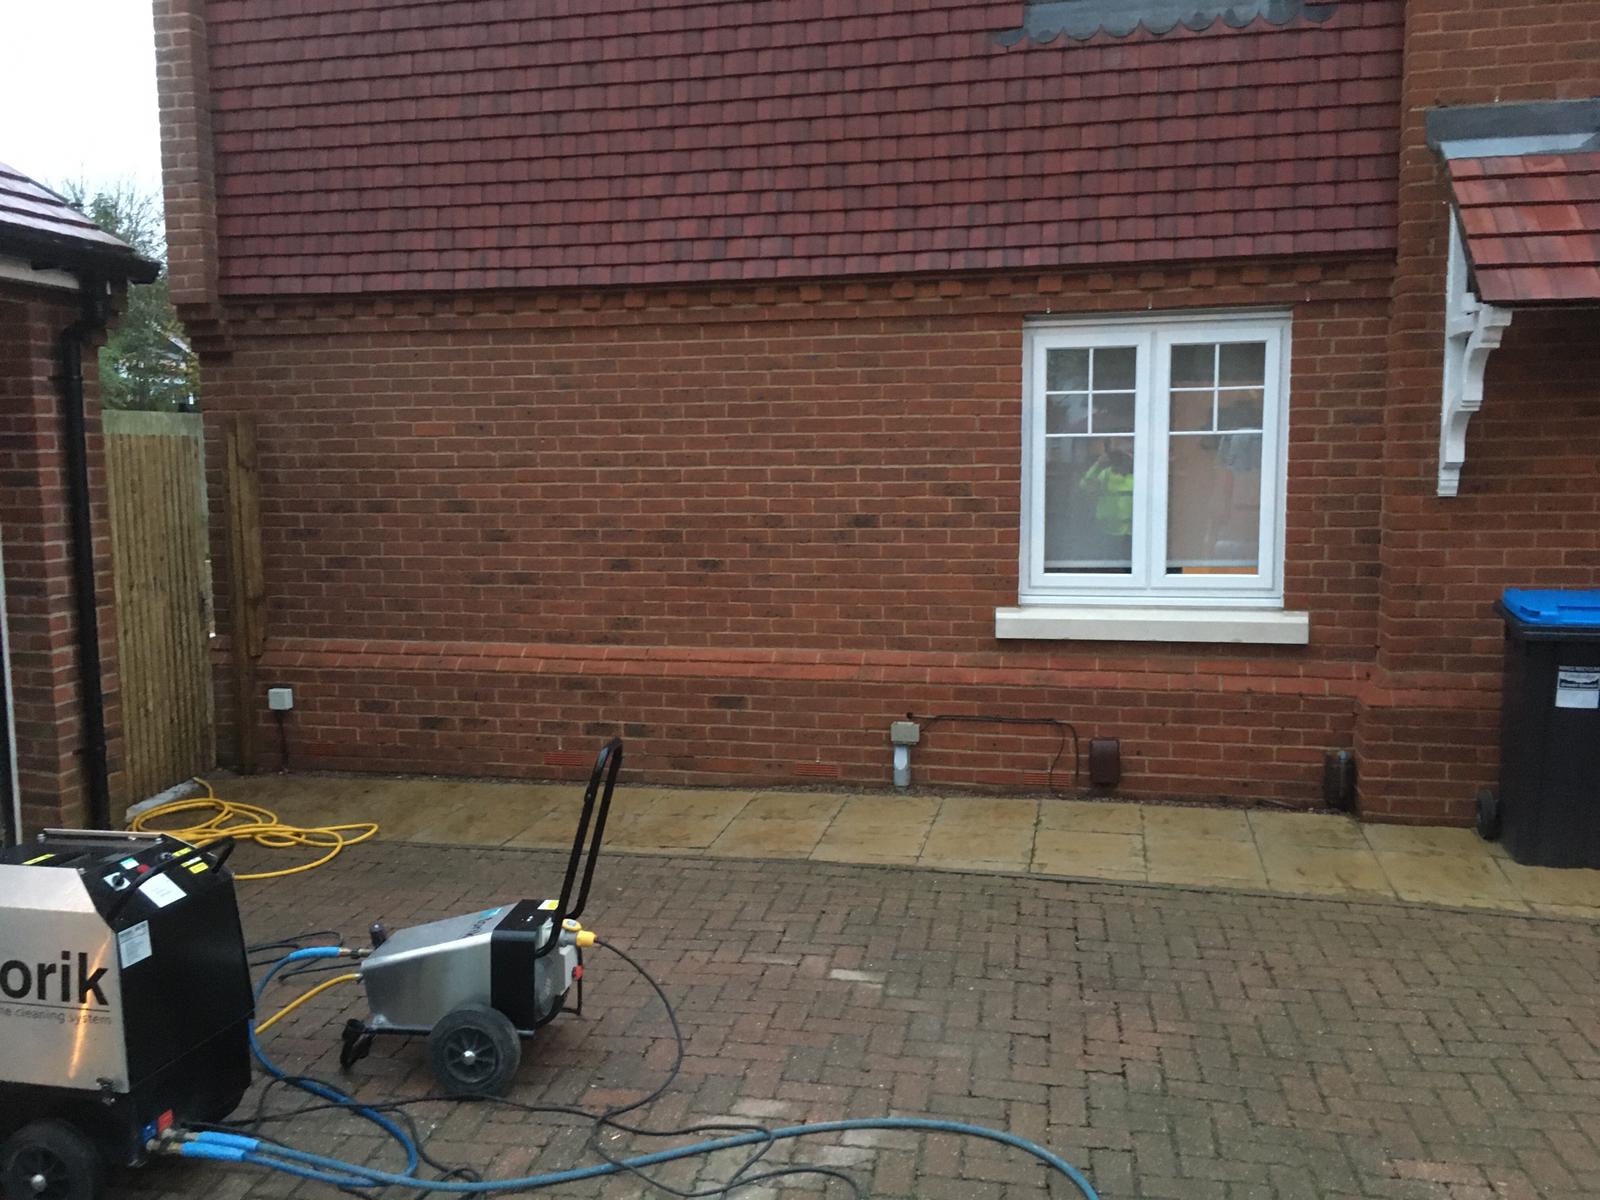 Brick cleaning both the walls of a house and its brick driveway